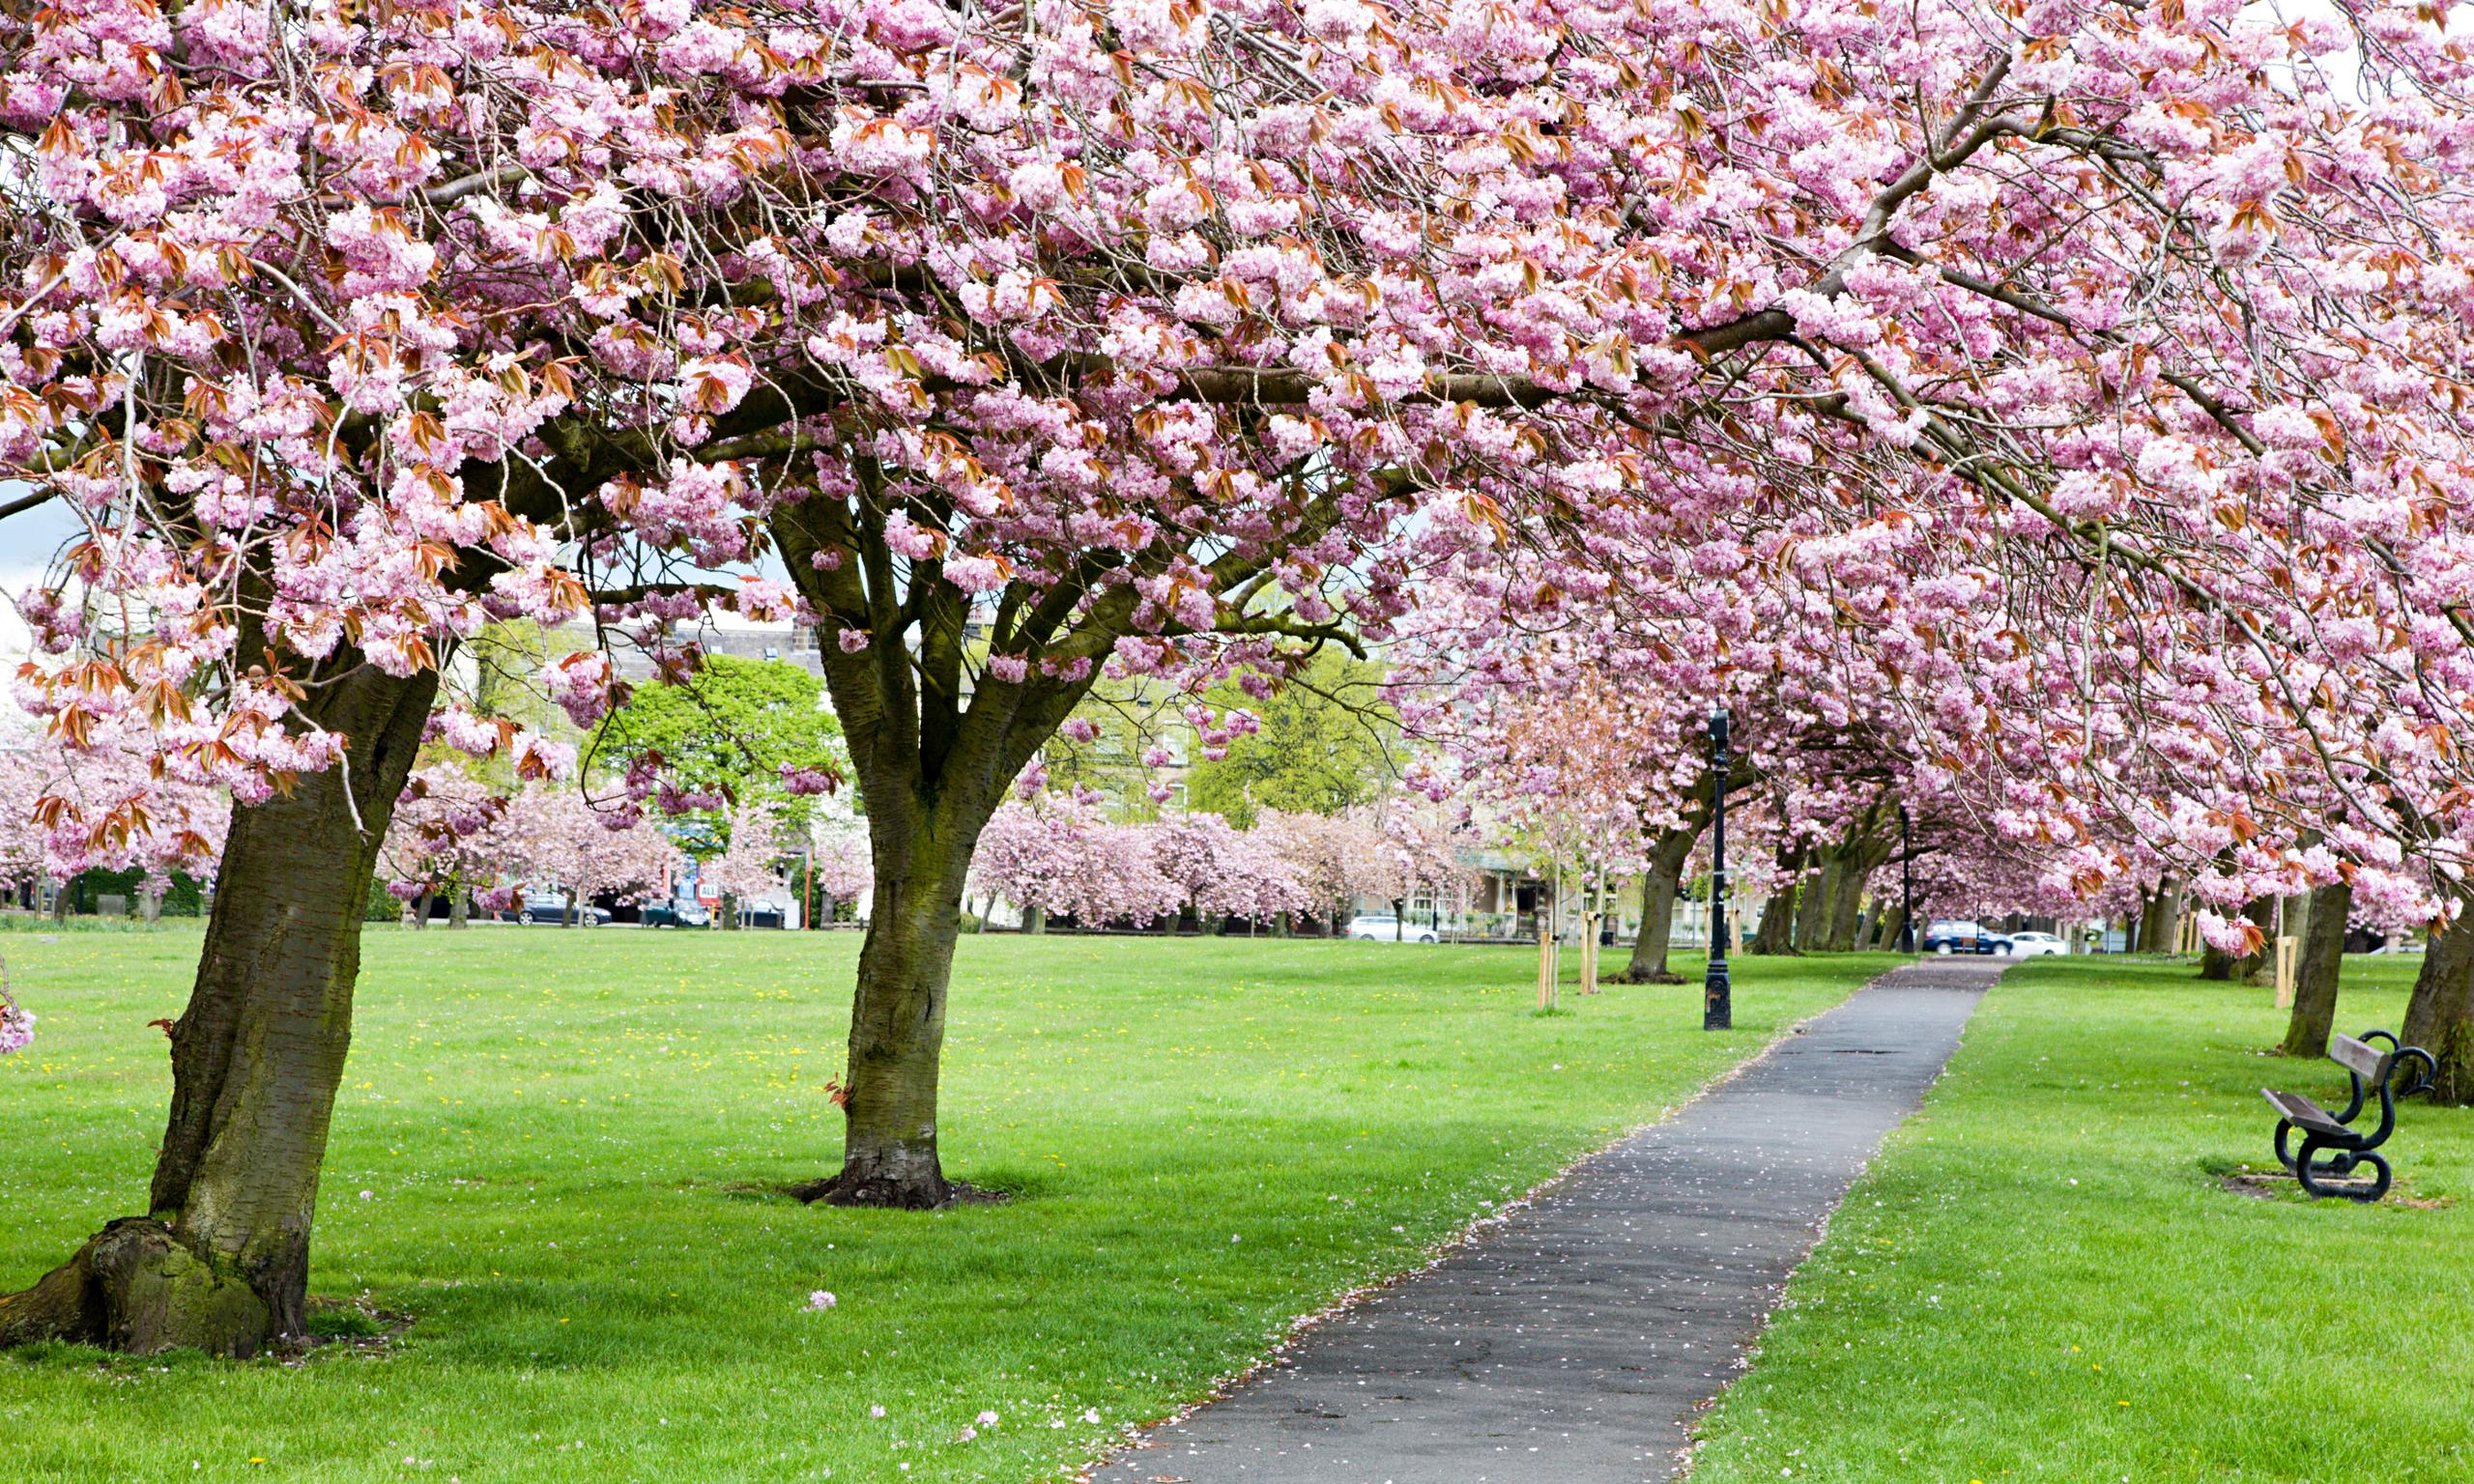 Trees with cherry blossom along a path through grass